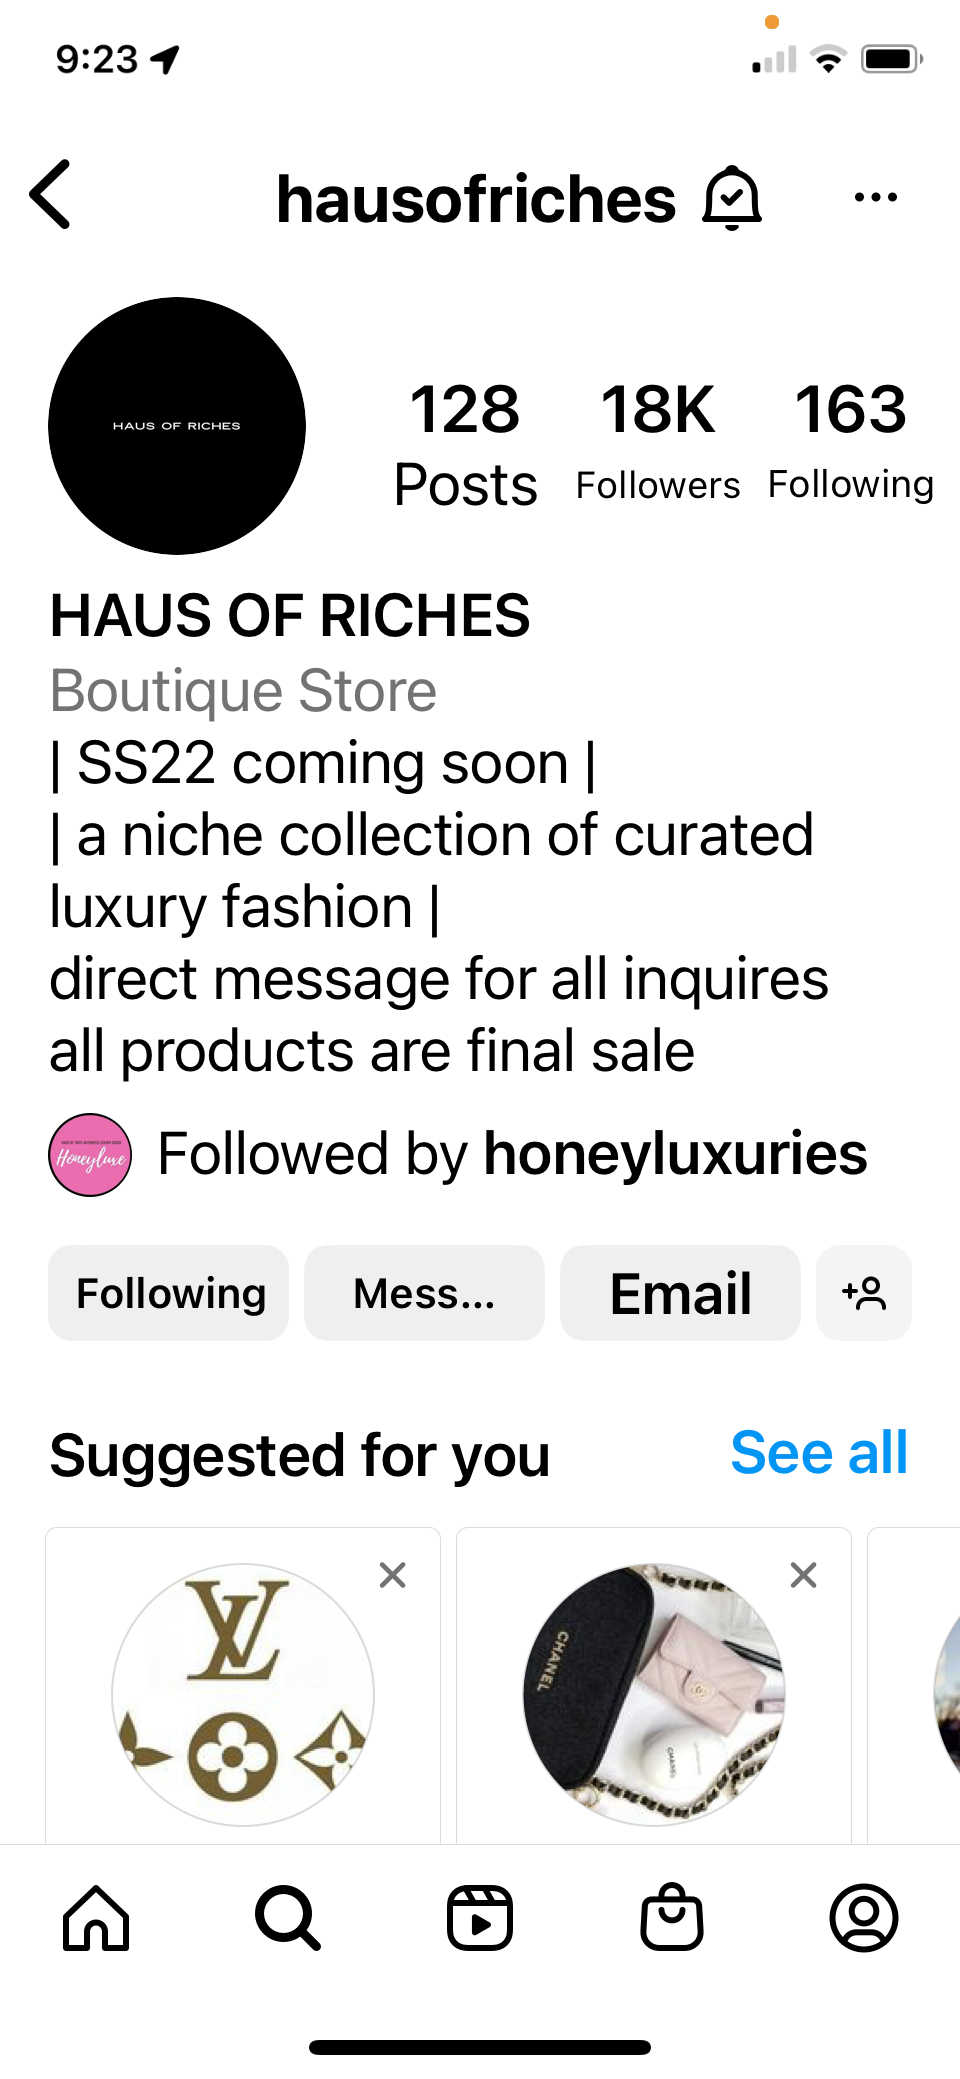 Haus of Riches IG page